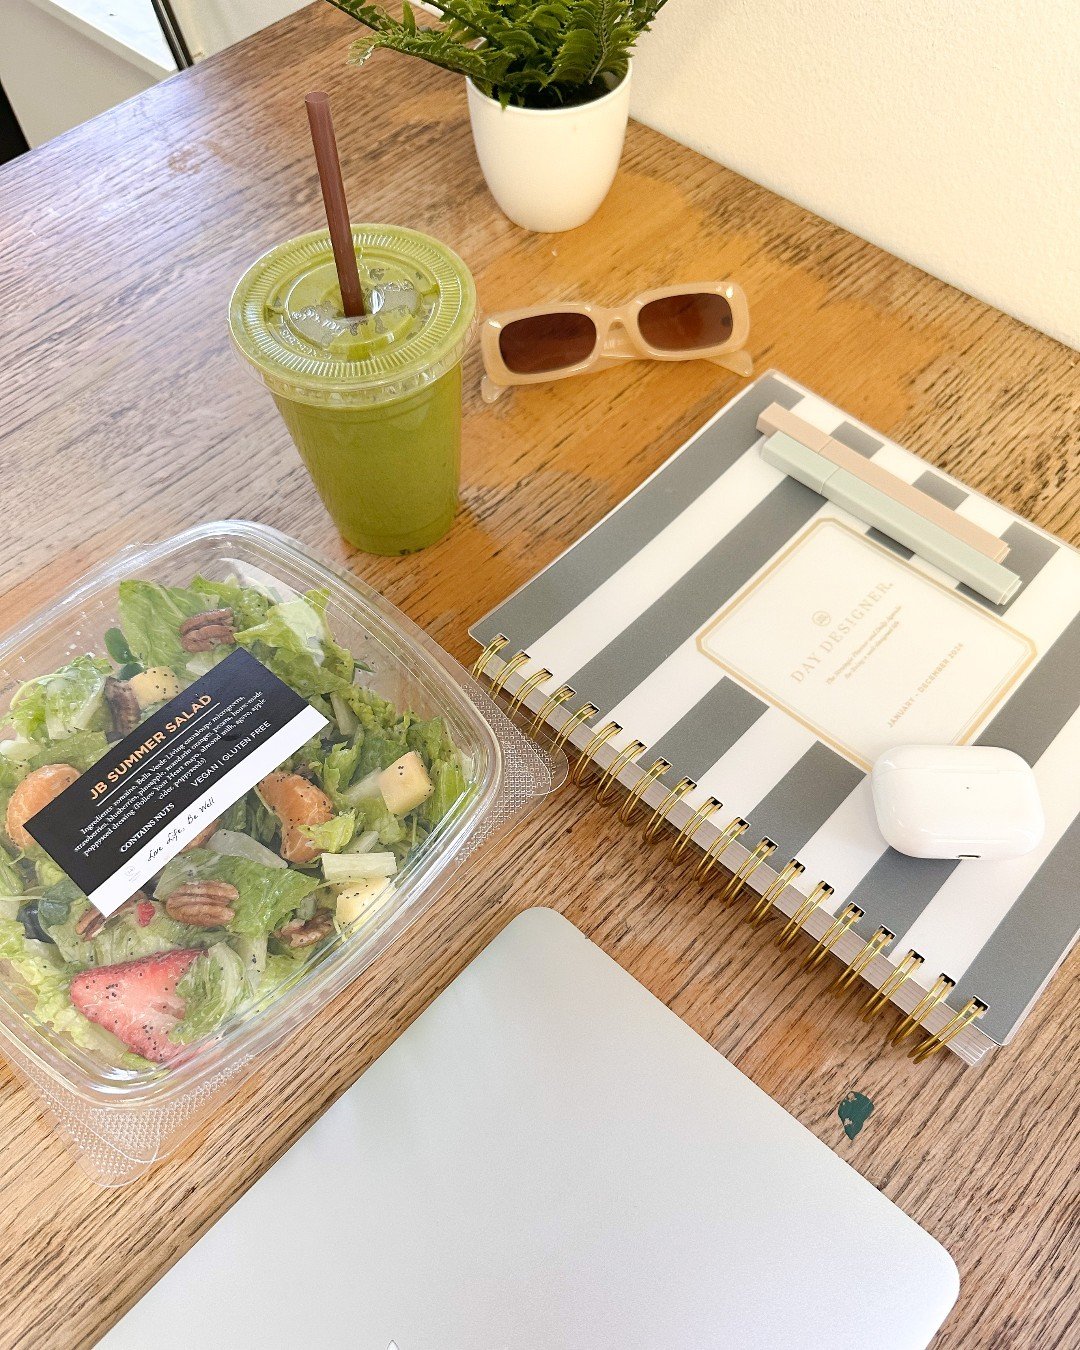 power your productivity to the next level @j.b.wellness ⚡📓 🥗

work from home? wanna step away from the office? we&rsquo;ve got wifi, coffee, nutritious dishes + good vibes ⚡️

PLUS, today we&rsquo;re celebrating DOUBLE LOYALTY POINTS! earn 2x the p